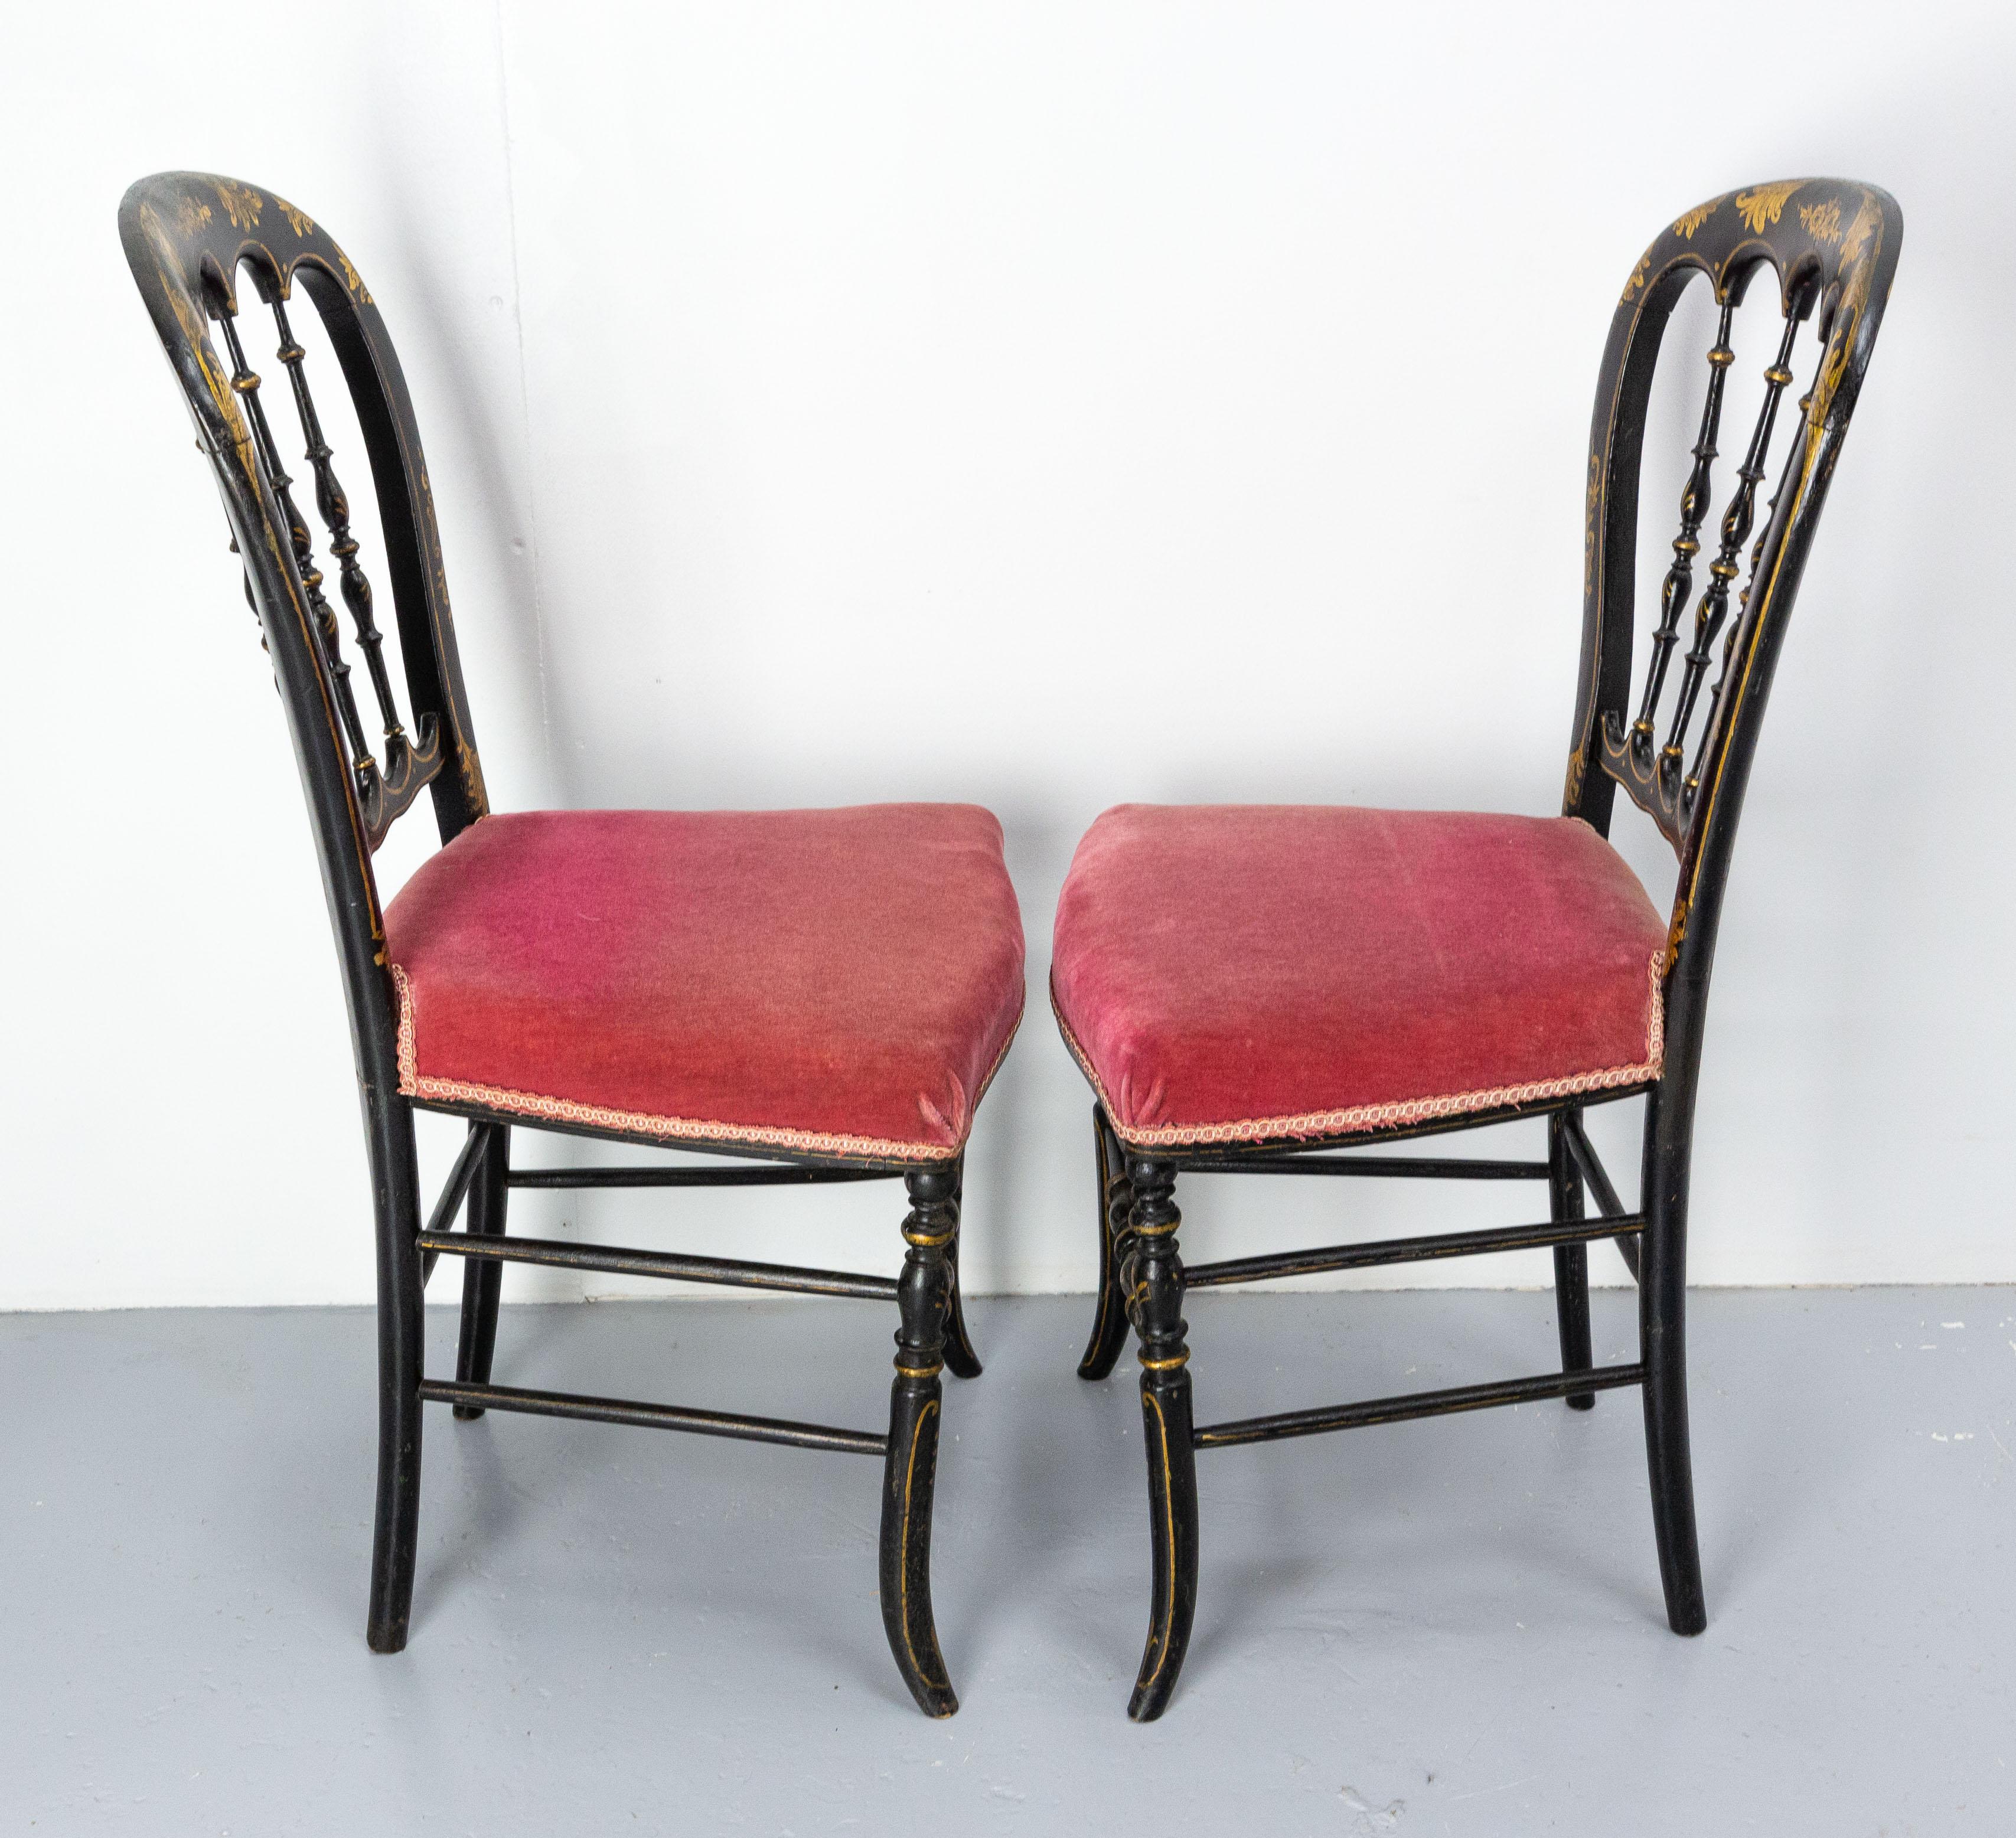 Upholstery Pair of Napoleon III Chairs Fabric and Painted Wood, French, Late 19th Century For Sale